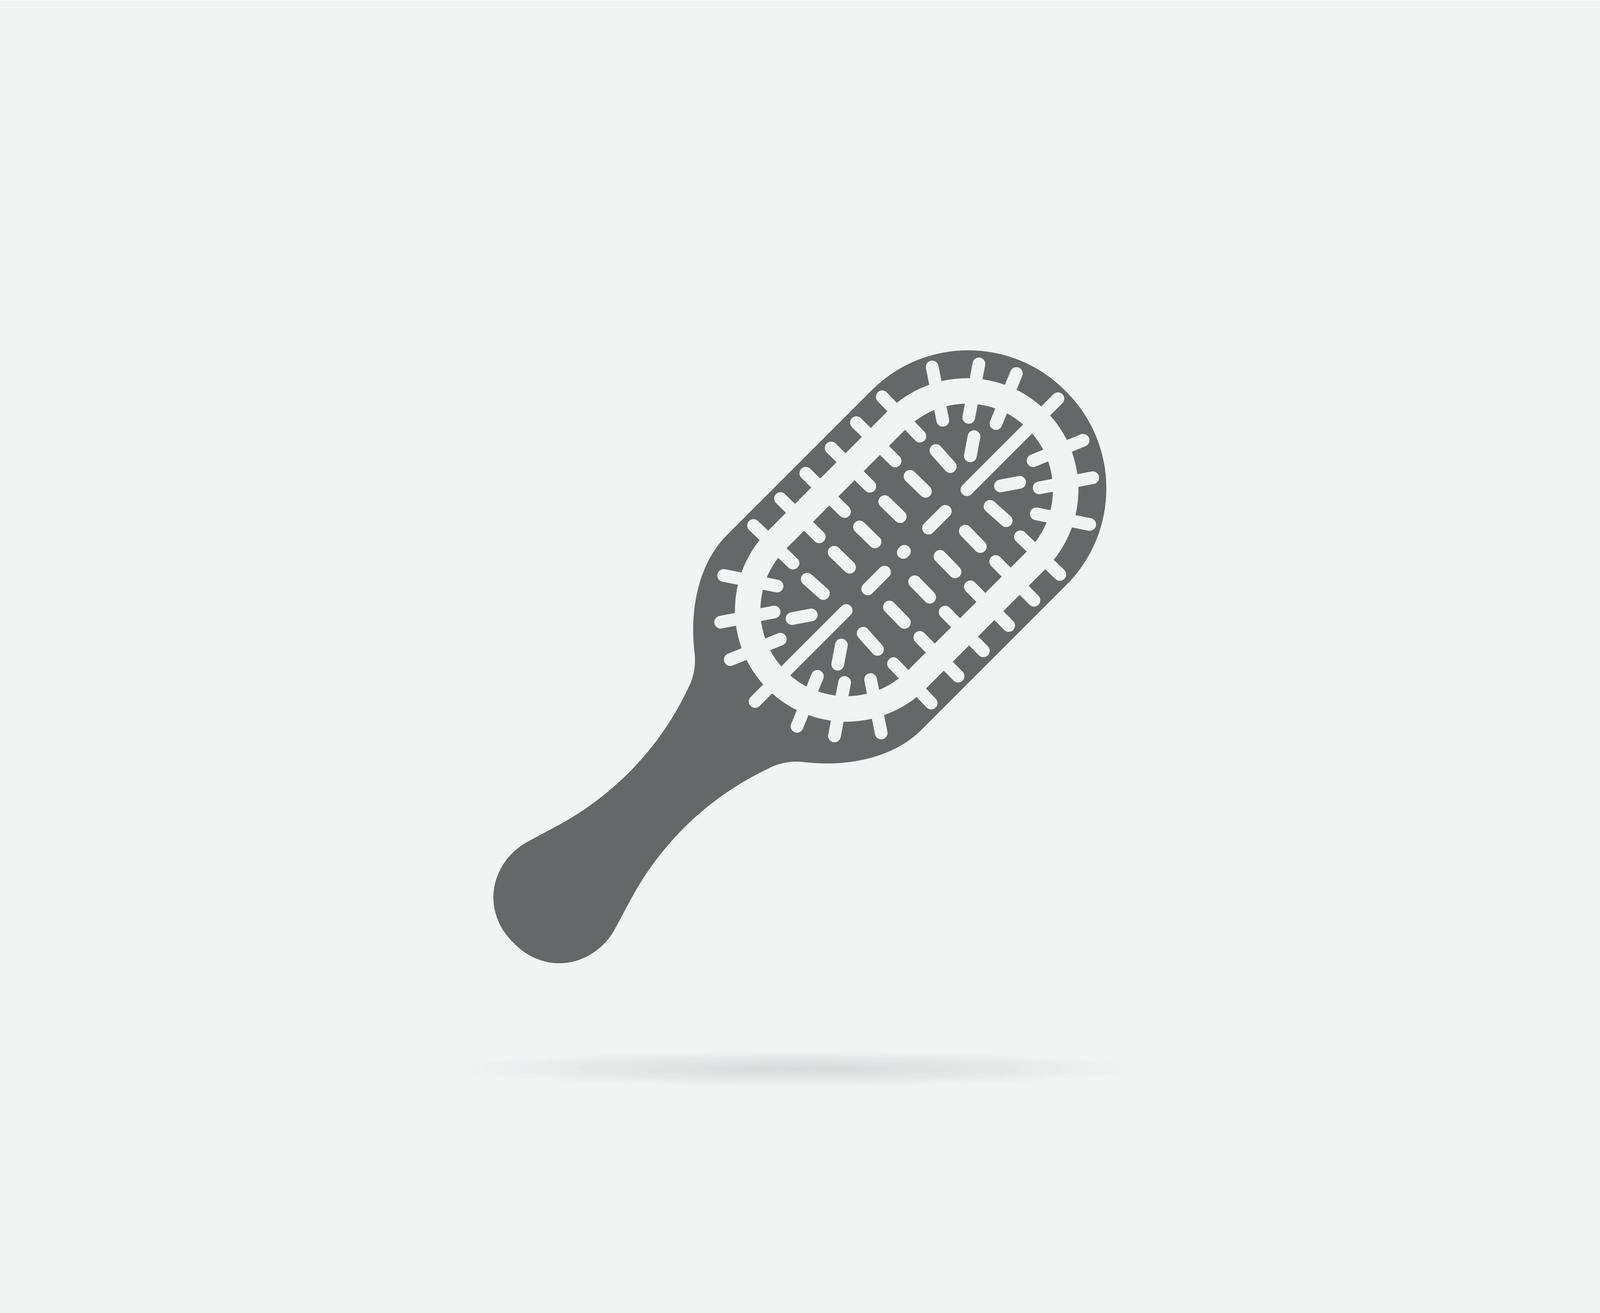 Hair Brush with Cushion Vector Element or Icon, Illustration Ready for Print or Plotter Cut or Using as Logotype with High Quality by ckybes